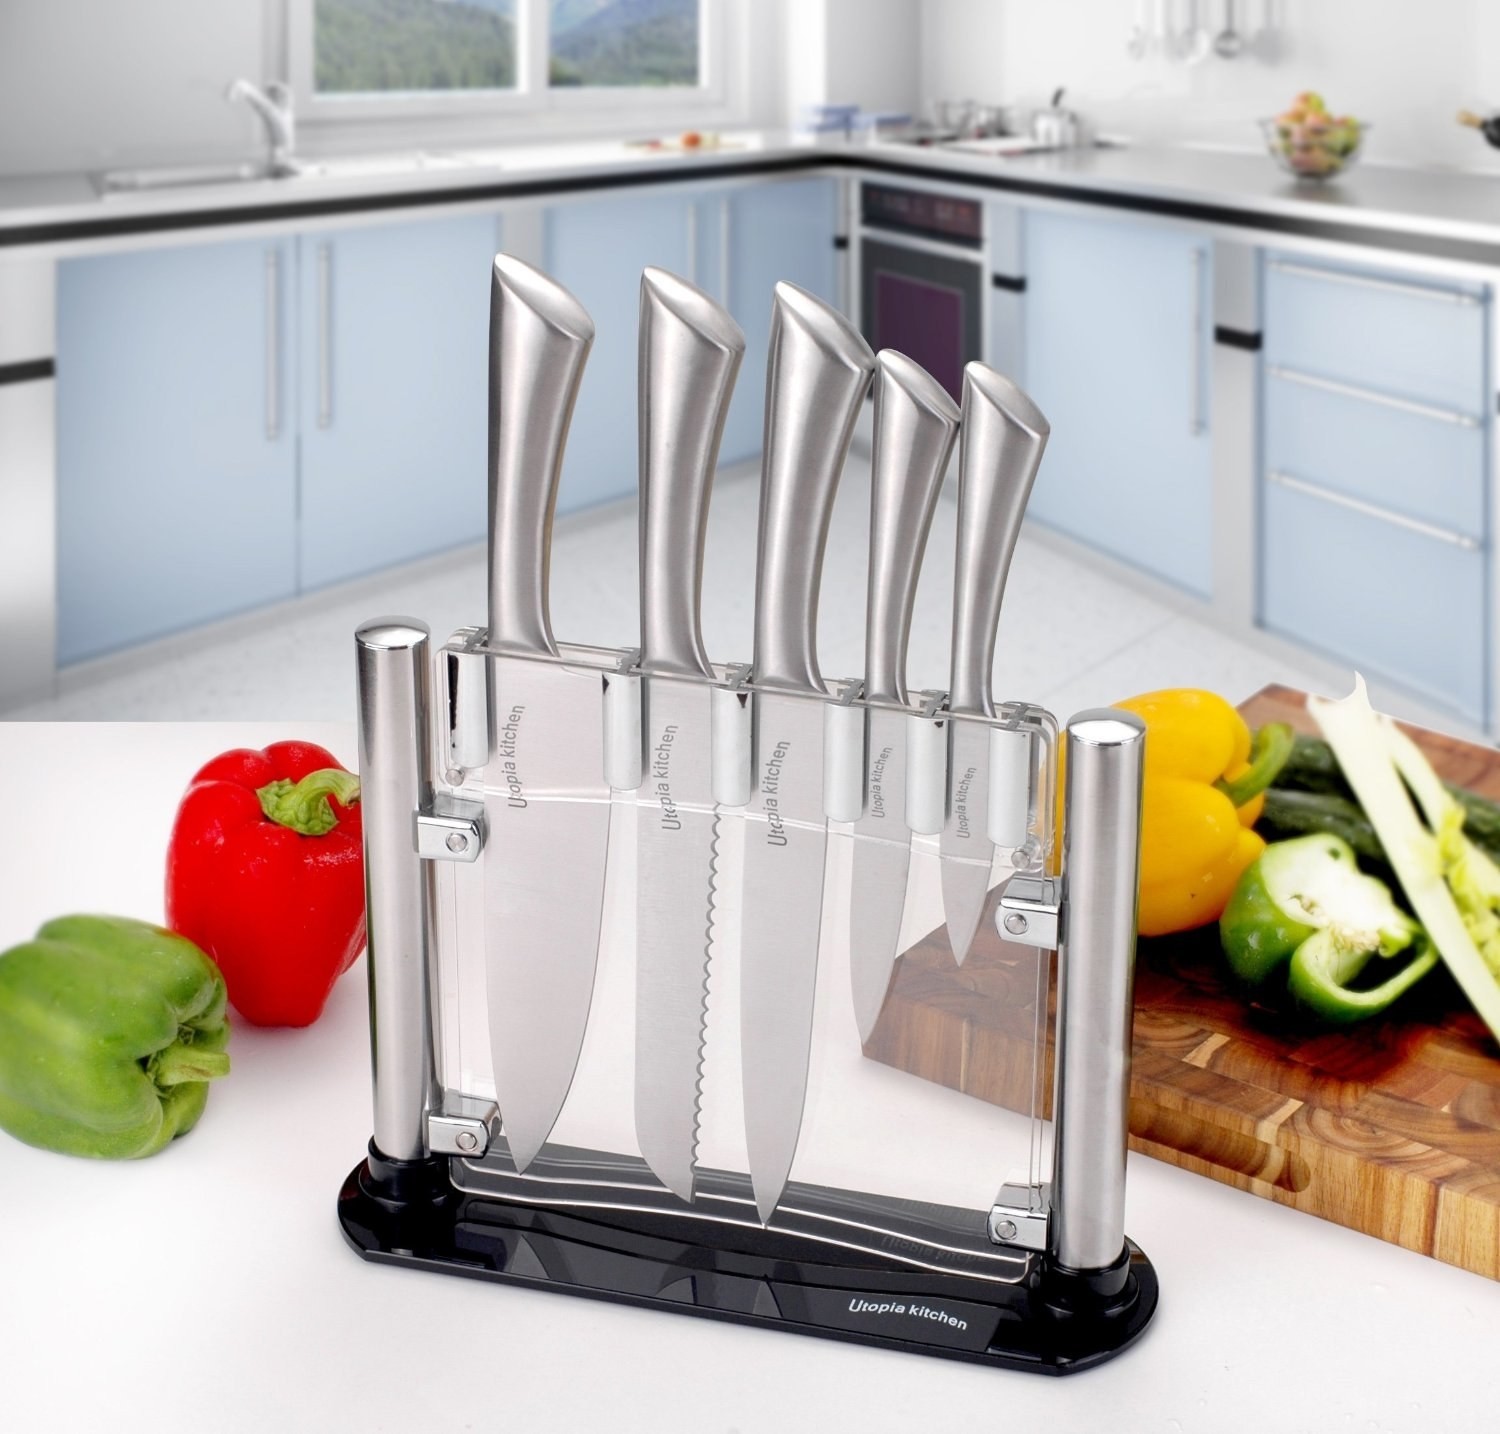 This set of amazing knifes with cool acrylic case - $23.91